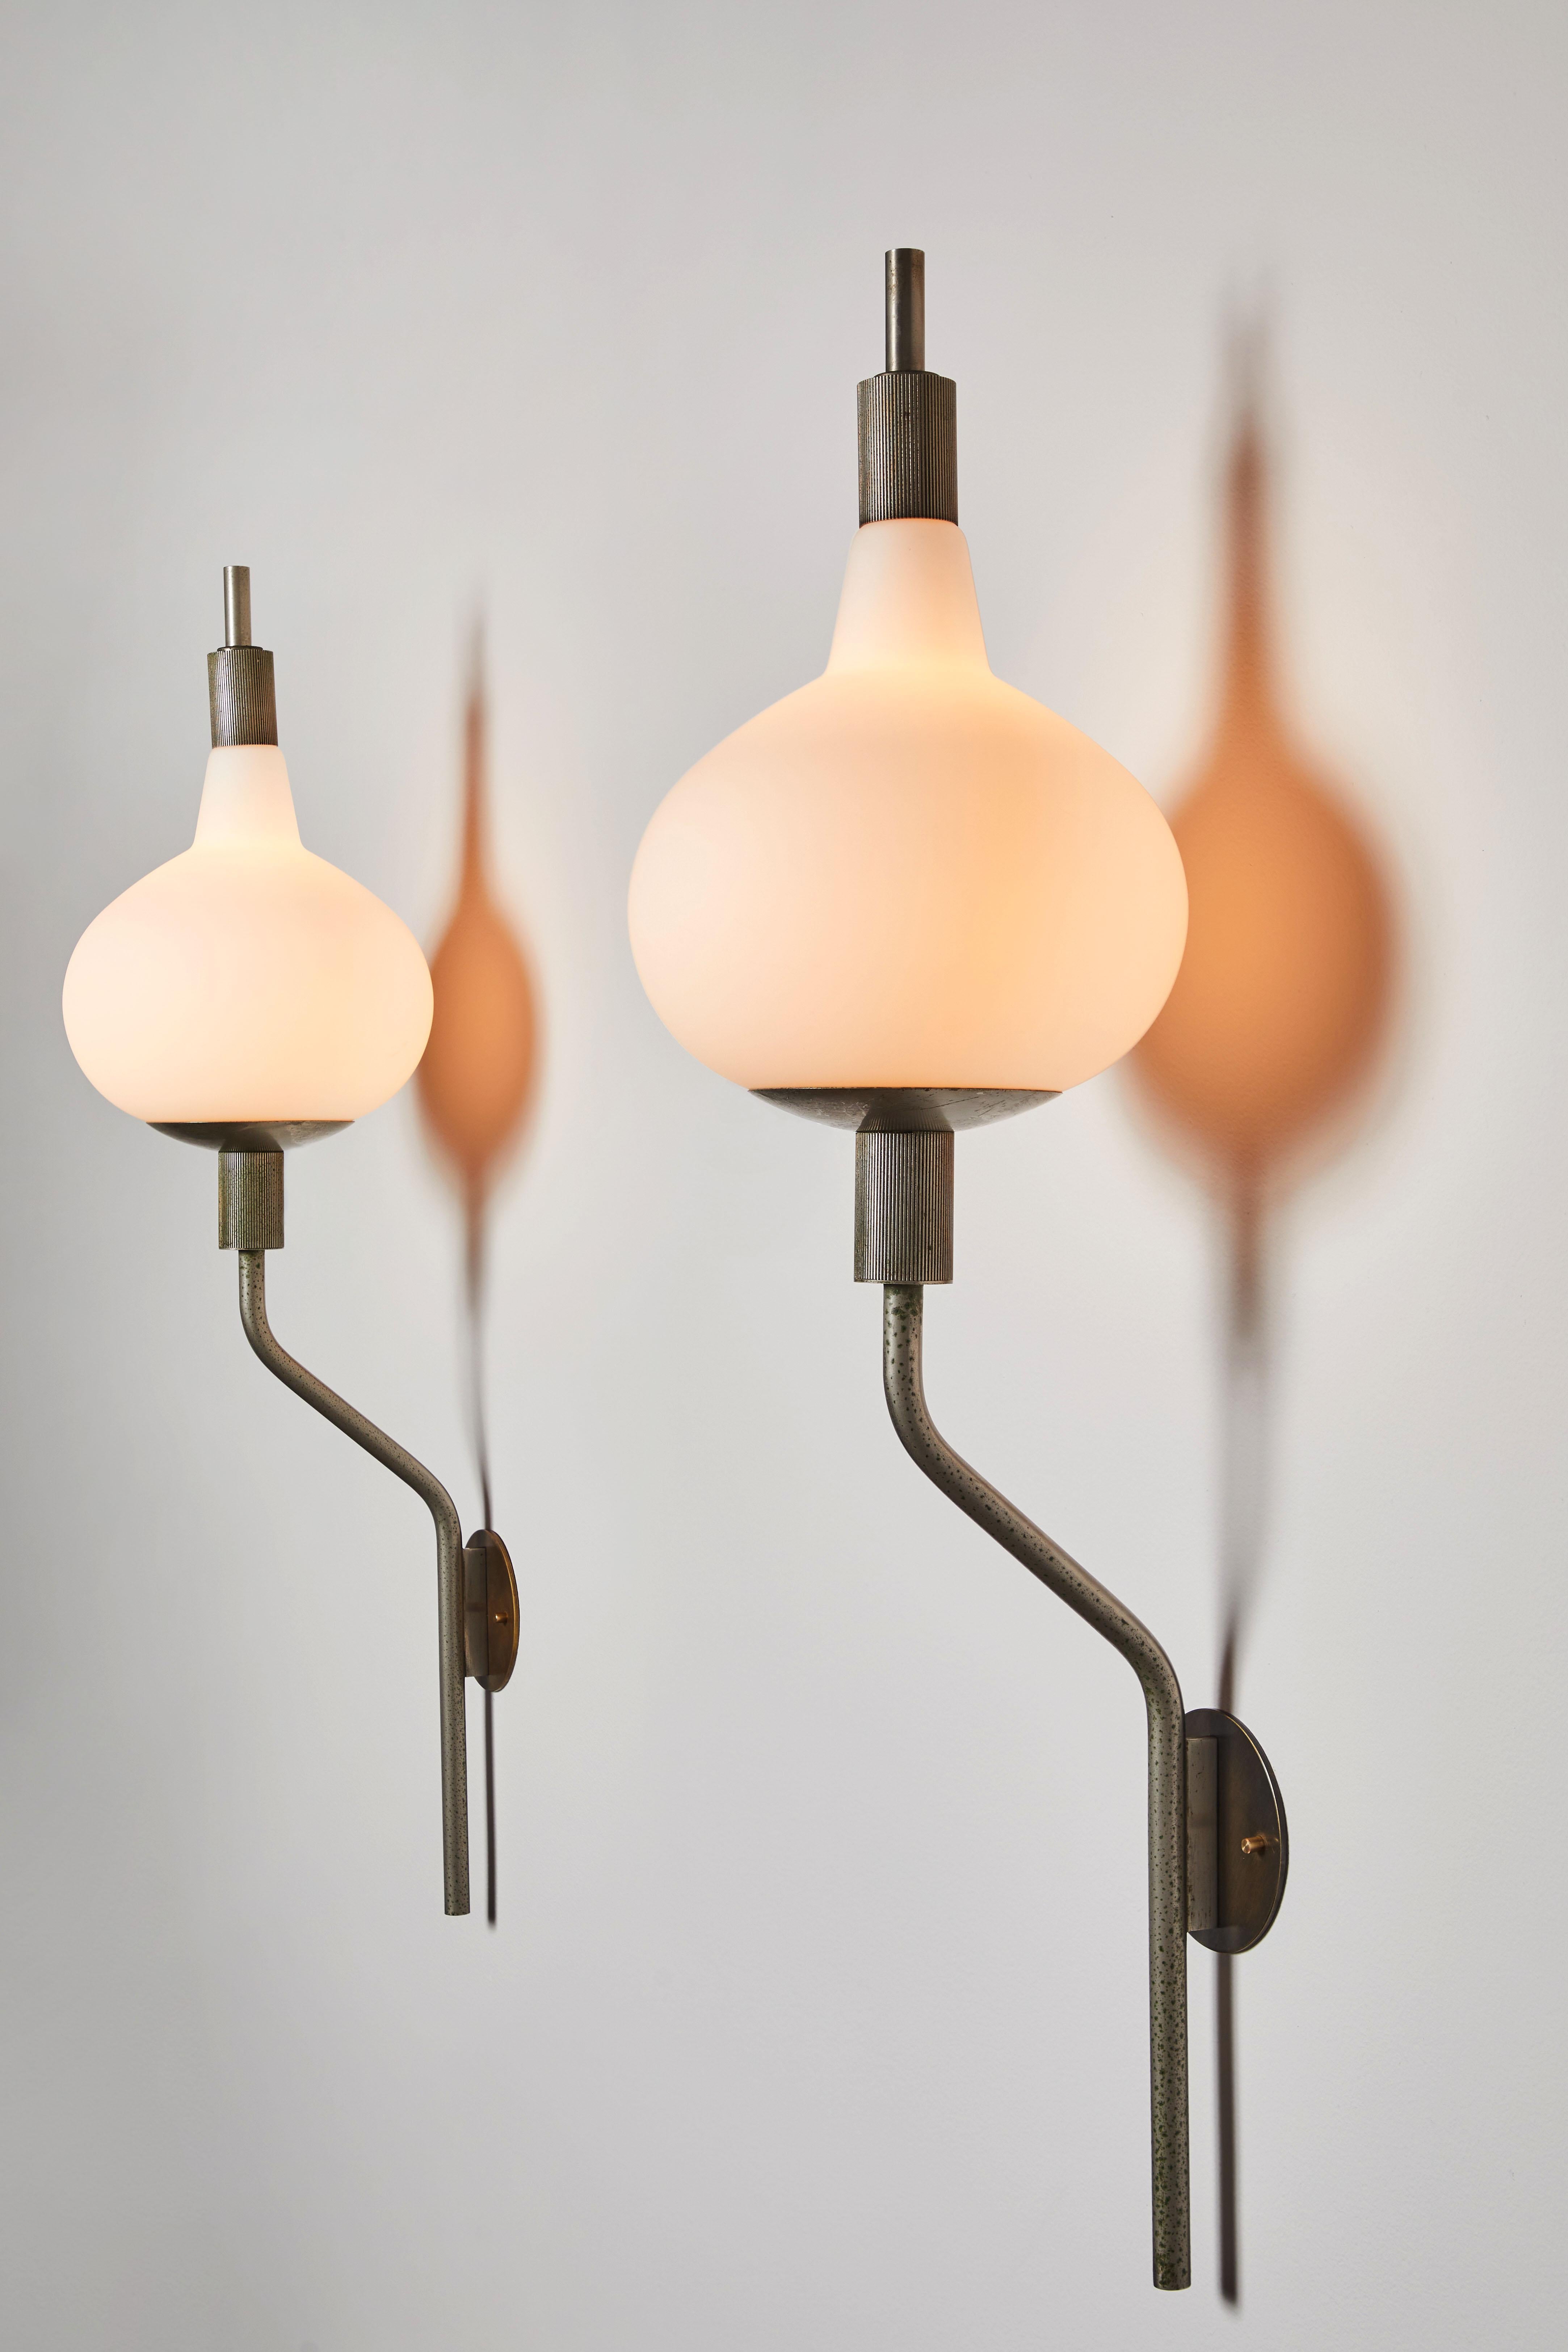 Six wall lights by Candle. Manufactured in Italy, circa 1960s. Brushed satin glass diffusers, satin nickel armature, custom backplates. Rewired for U.S. standards. We recommend three E27 40w maximum candelabra bulbs per light. Bulbs provided as a